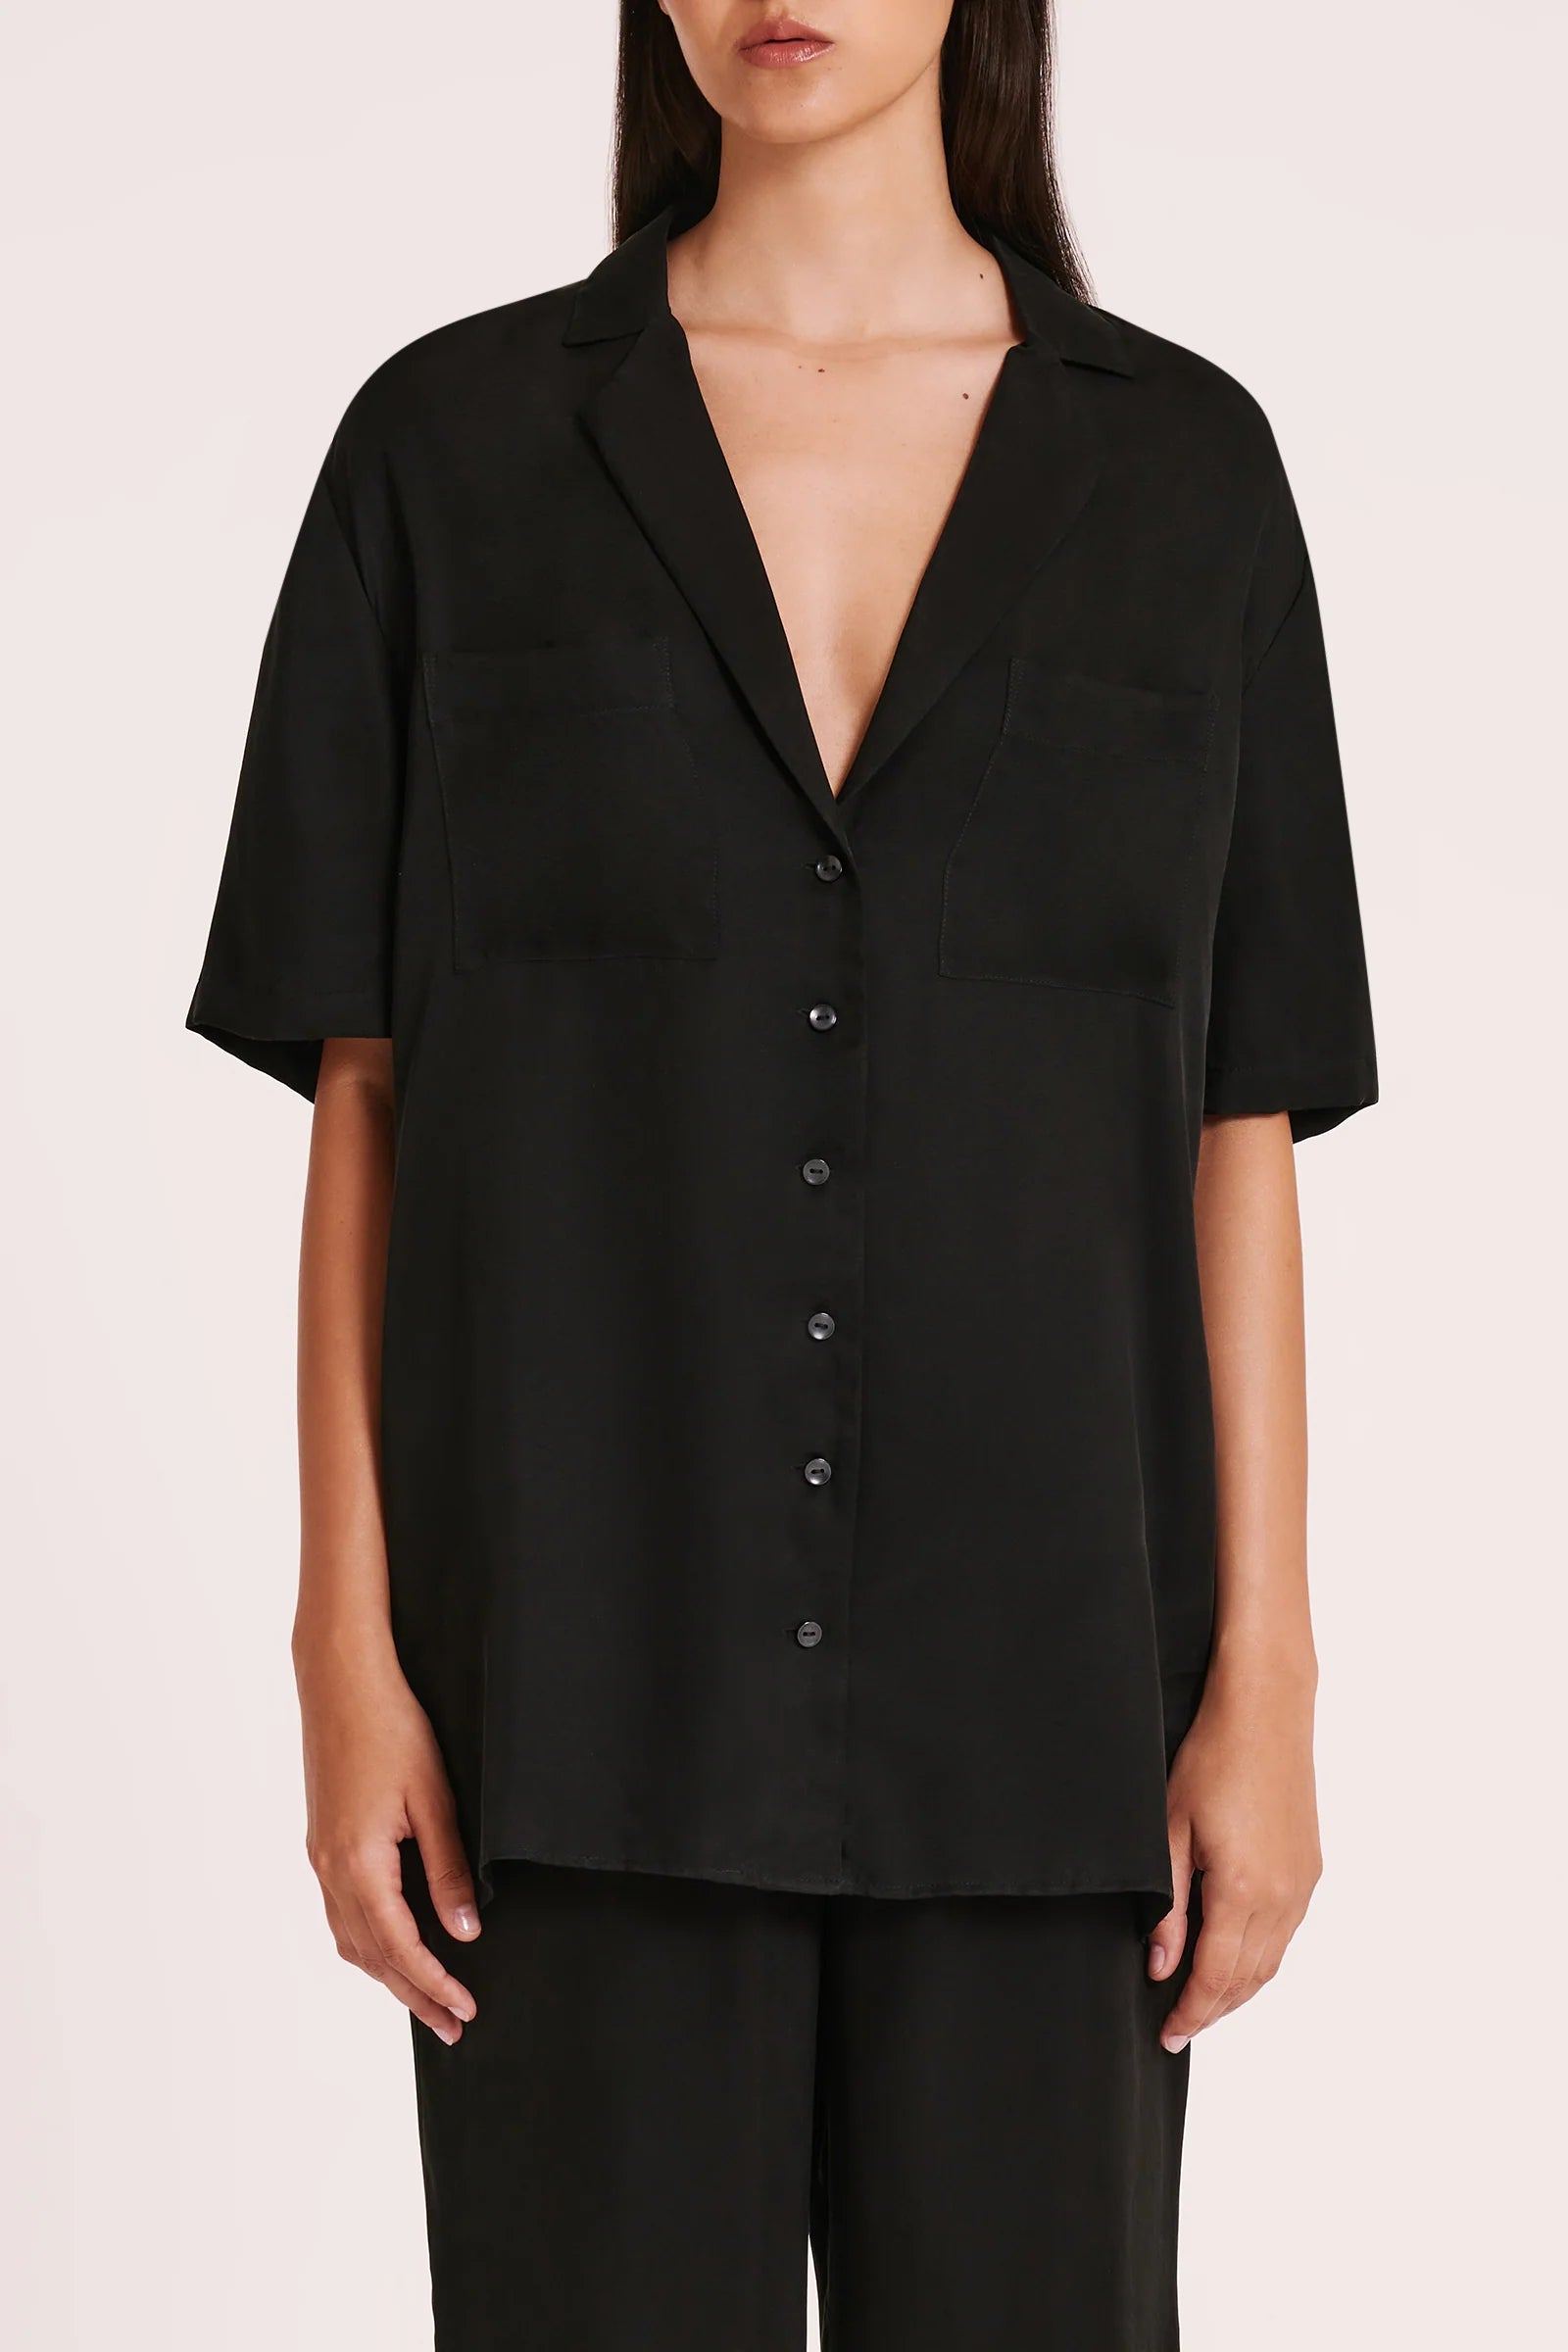 Nude Lucy | Lucia Cupro Shirt - Black